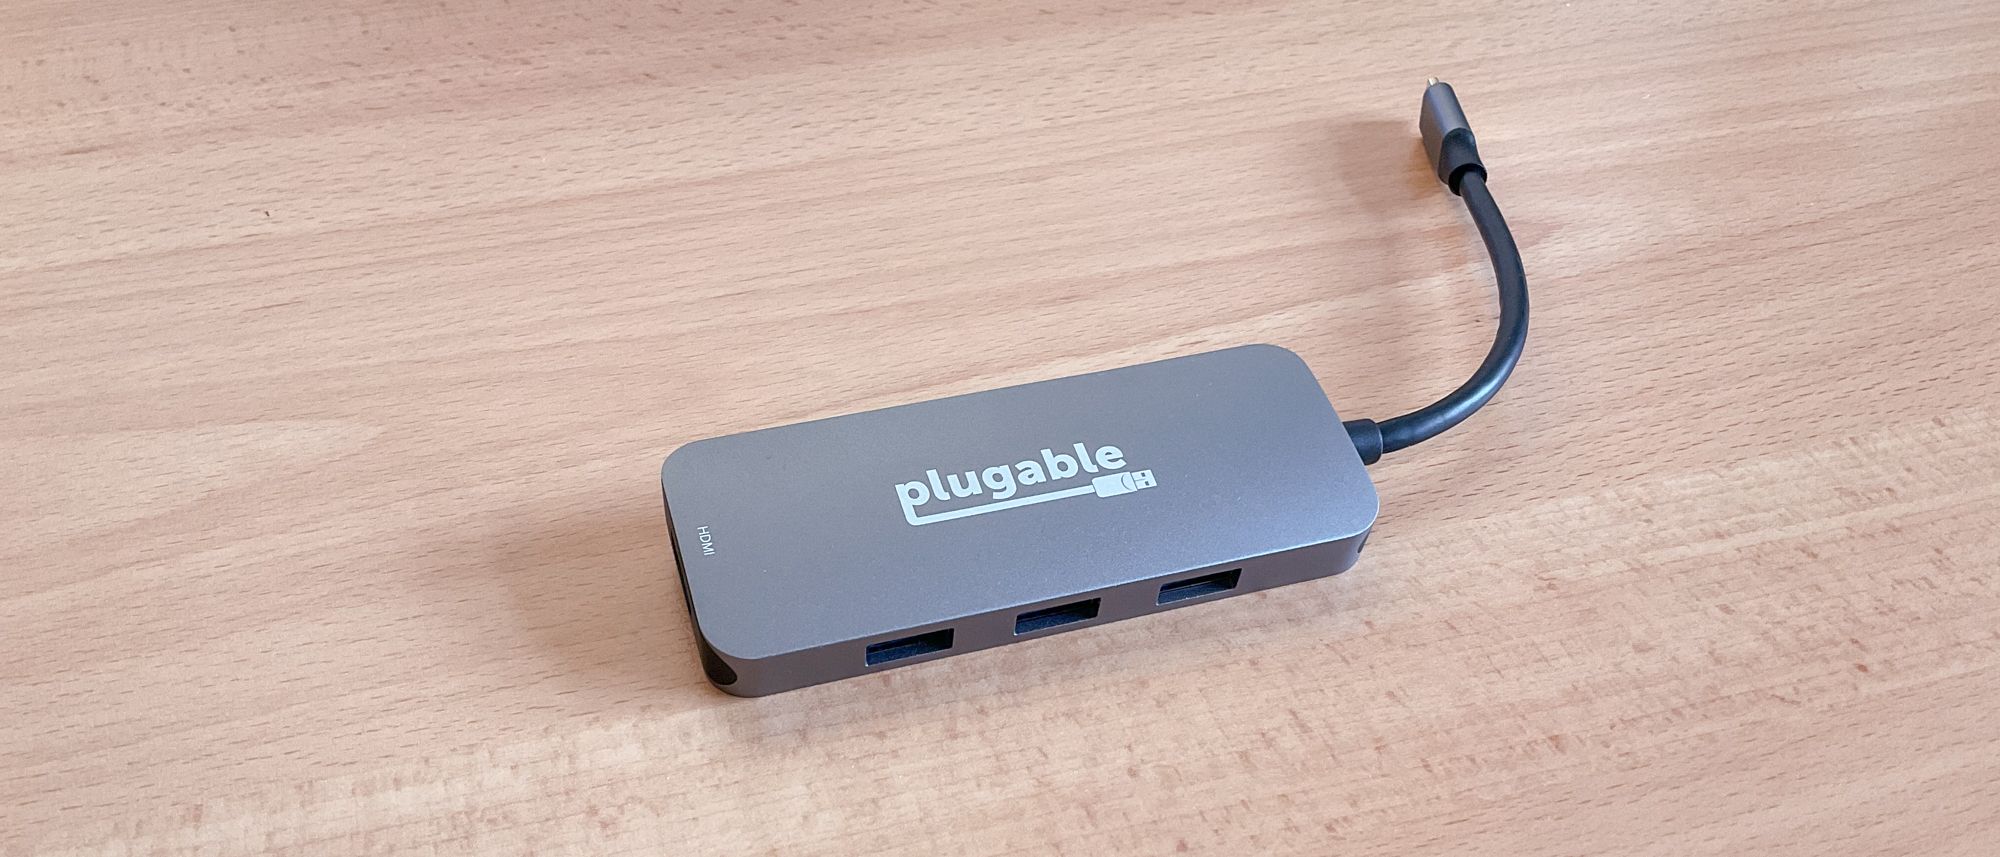 Plugable USB-C 7-in-1 Hub review: Small and powerful